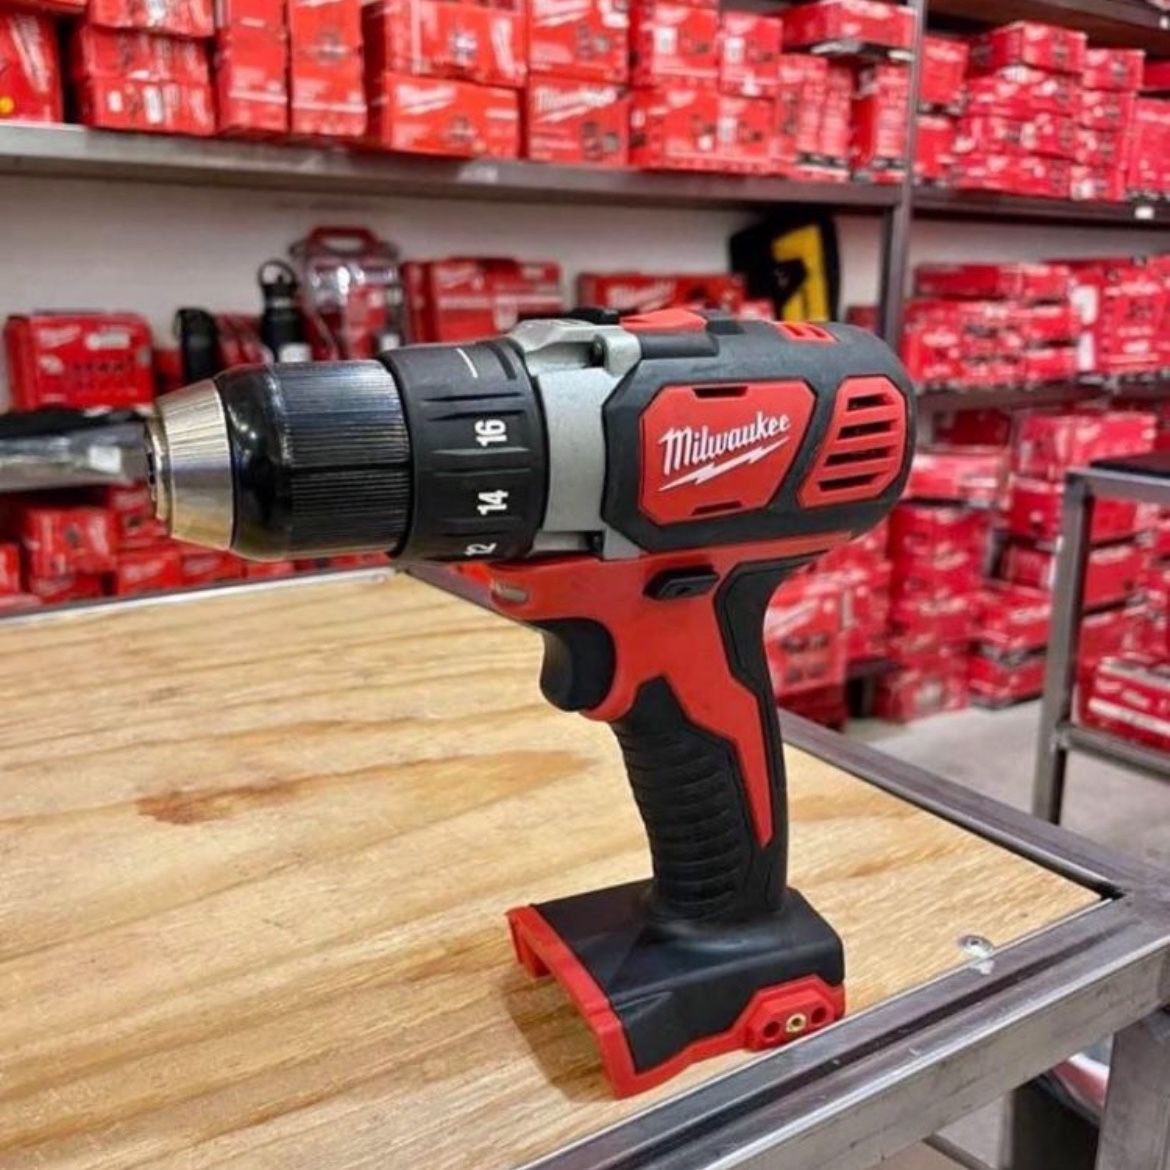 MILWAUKEE M18 1/2” DRILL/DRIVER (TOOL ONLY) 2606-20